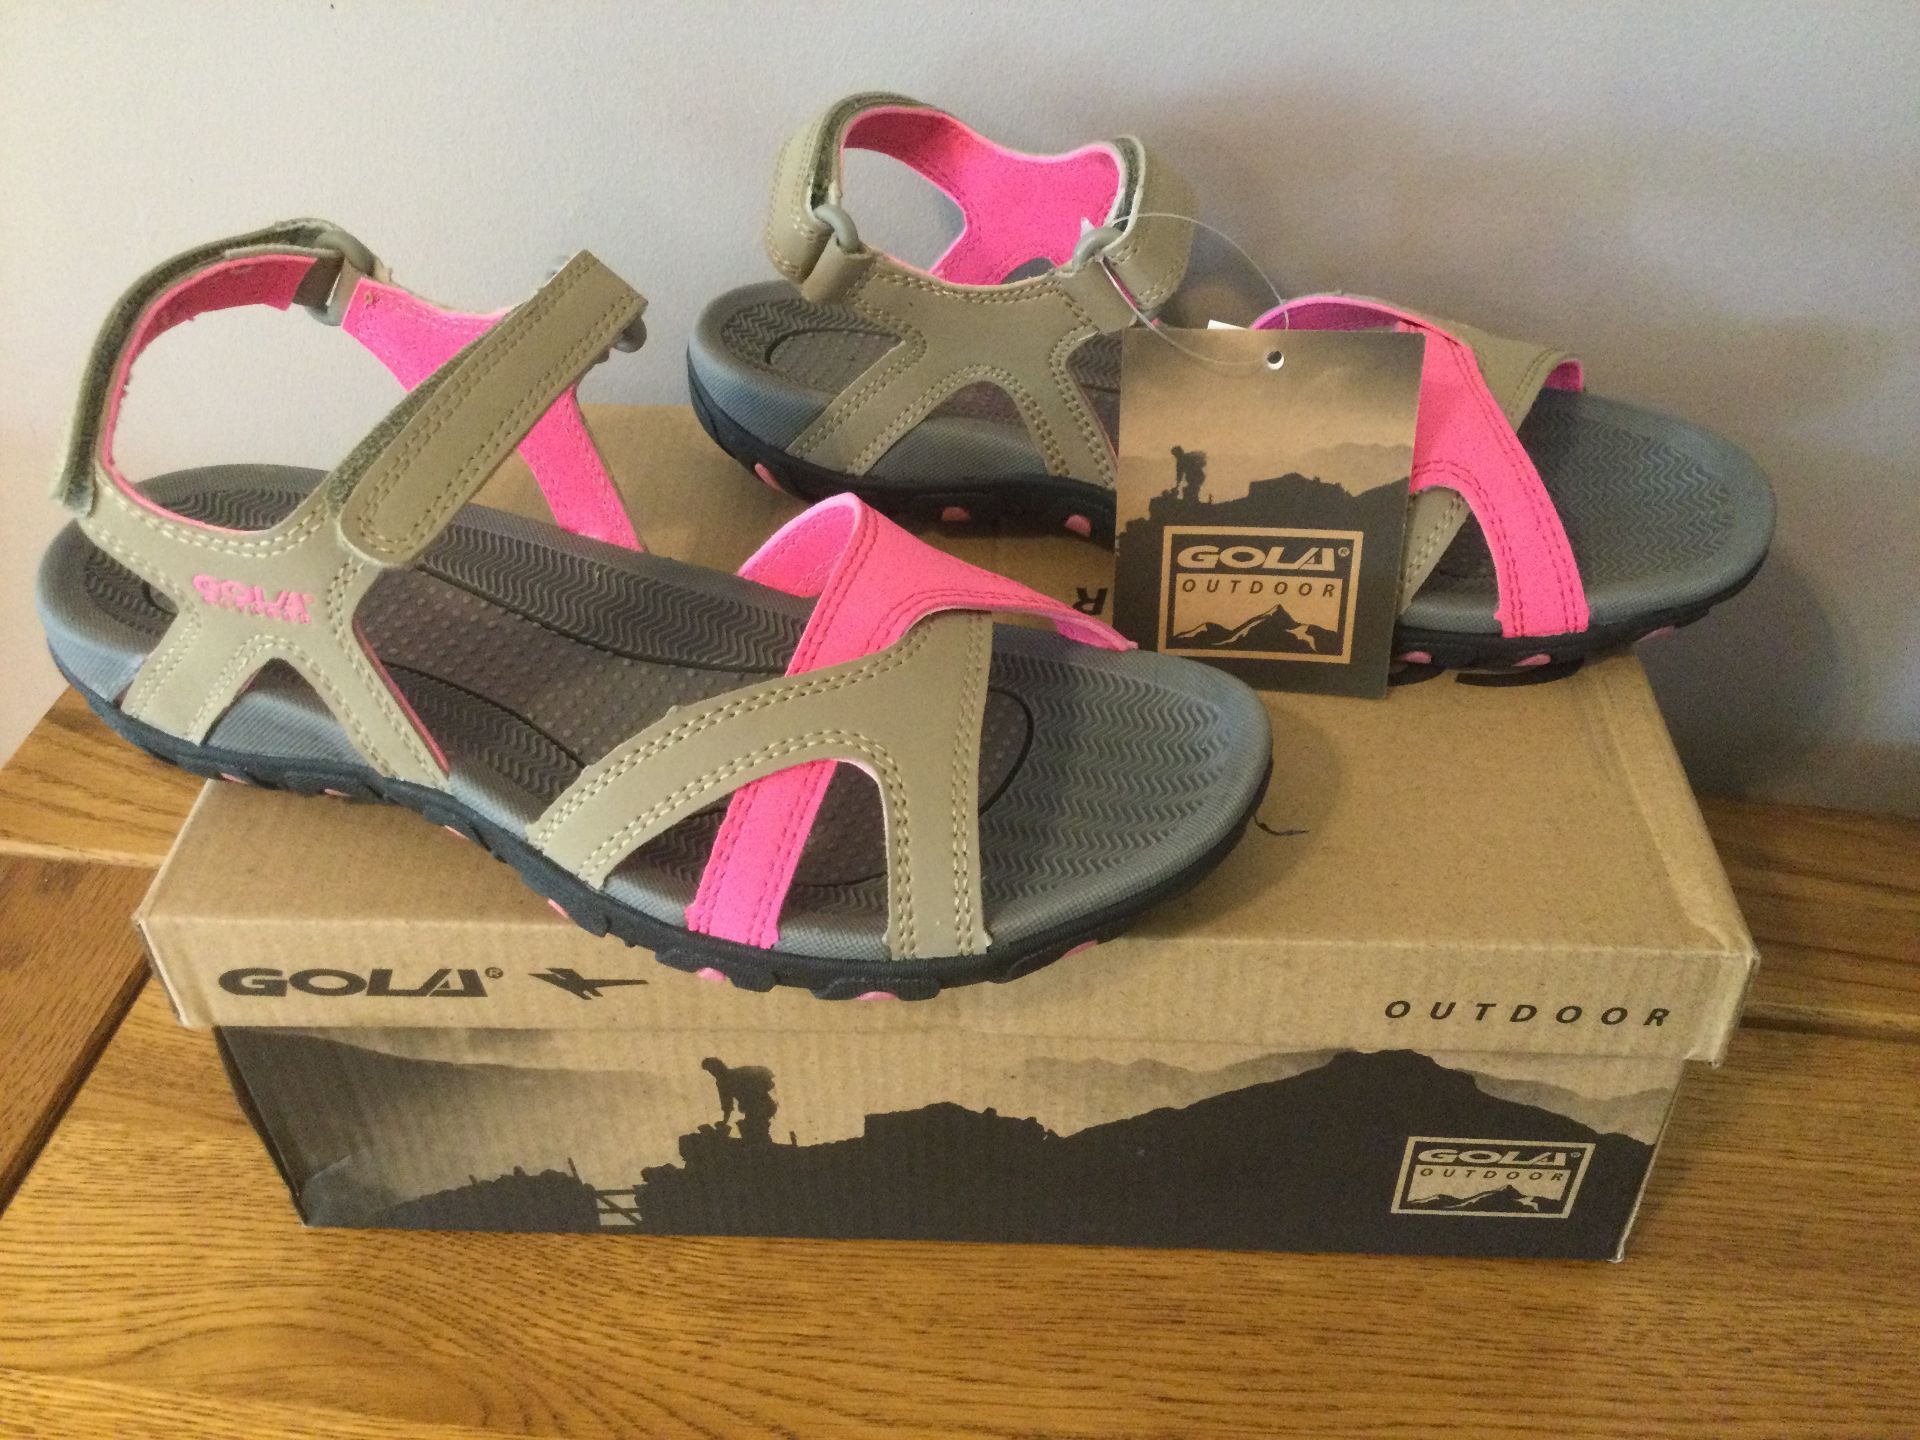 Gola Women's “Cedar” Hiking Sandals, Taupe/Hot Pink, Size 4 - Brand New